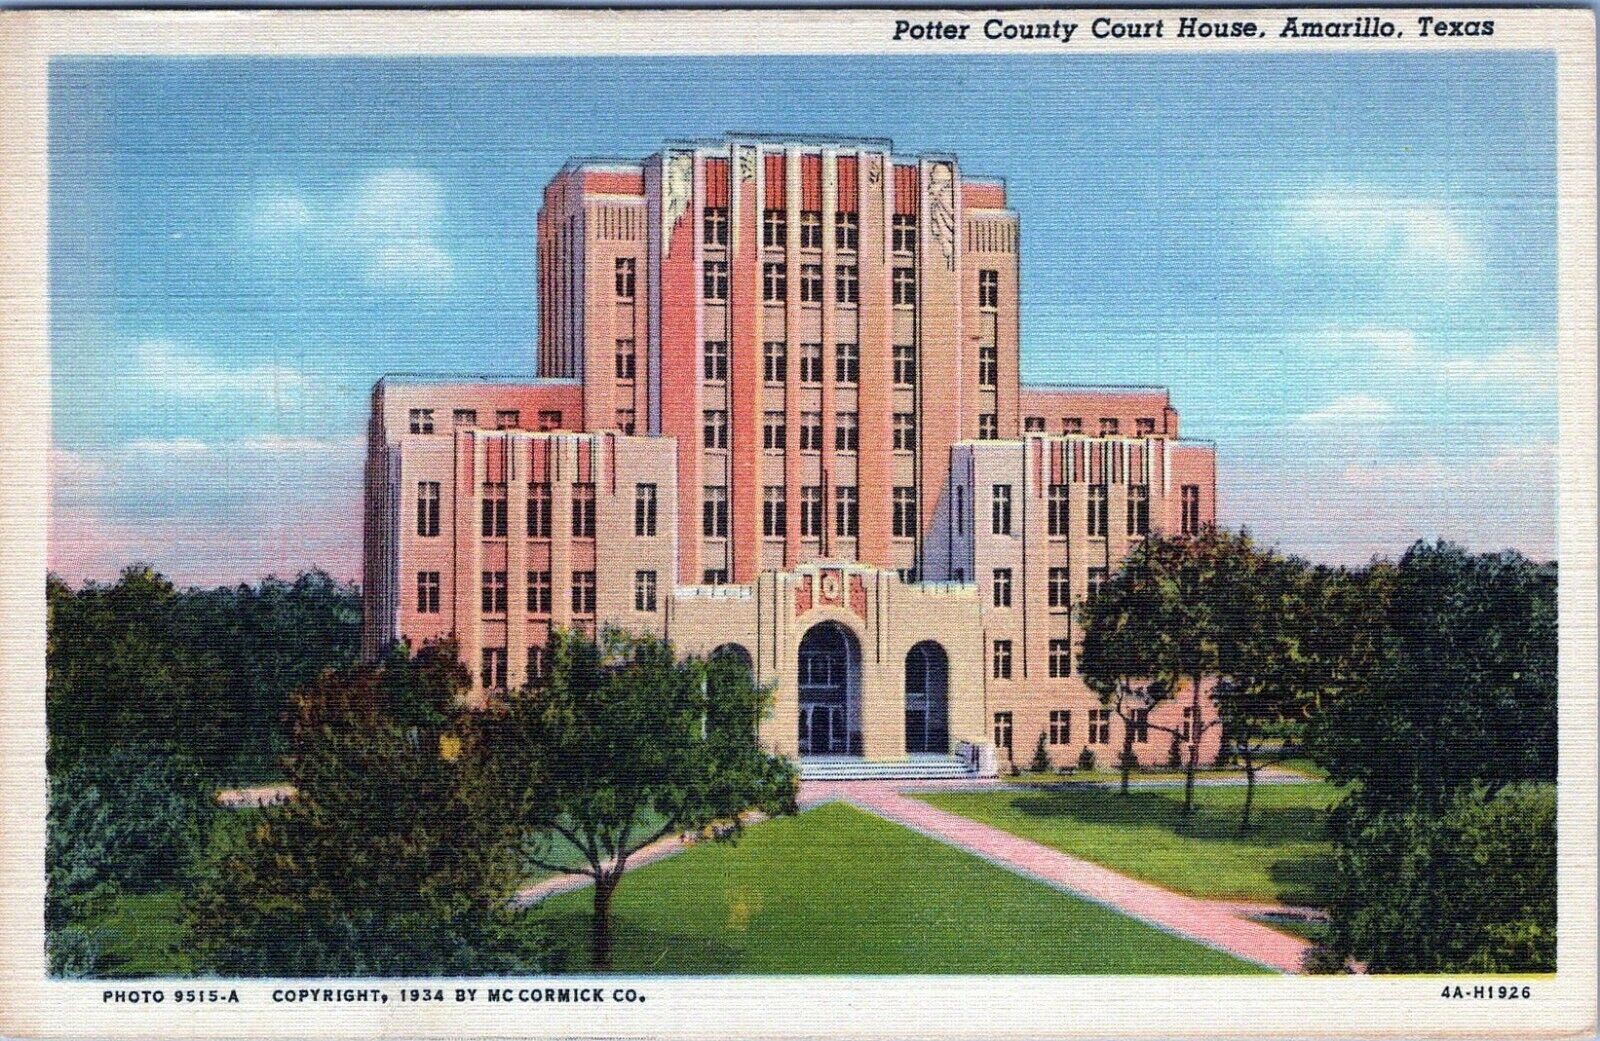 Potter County Court House Amarillo Texas Postcard 4A-H1926 Unposted